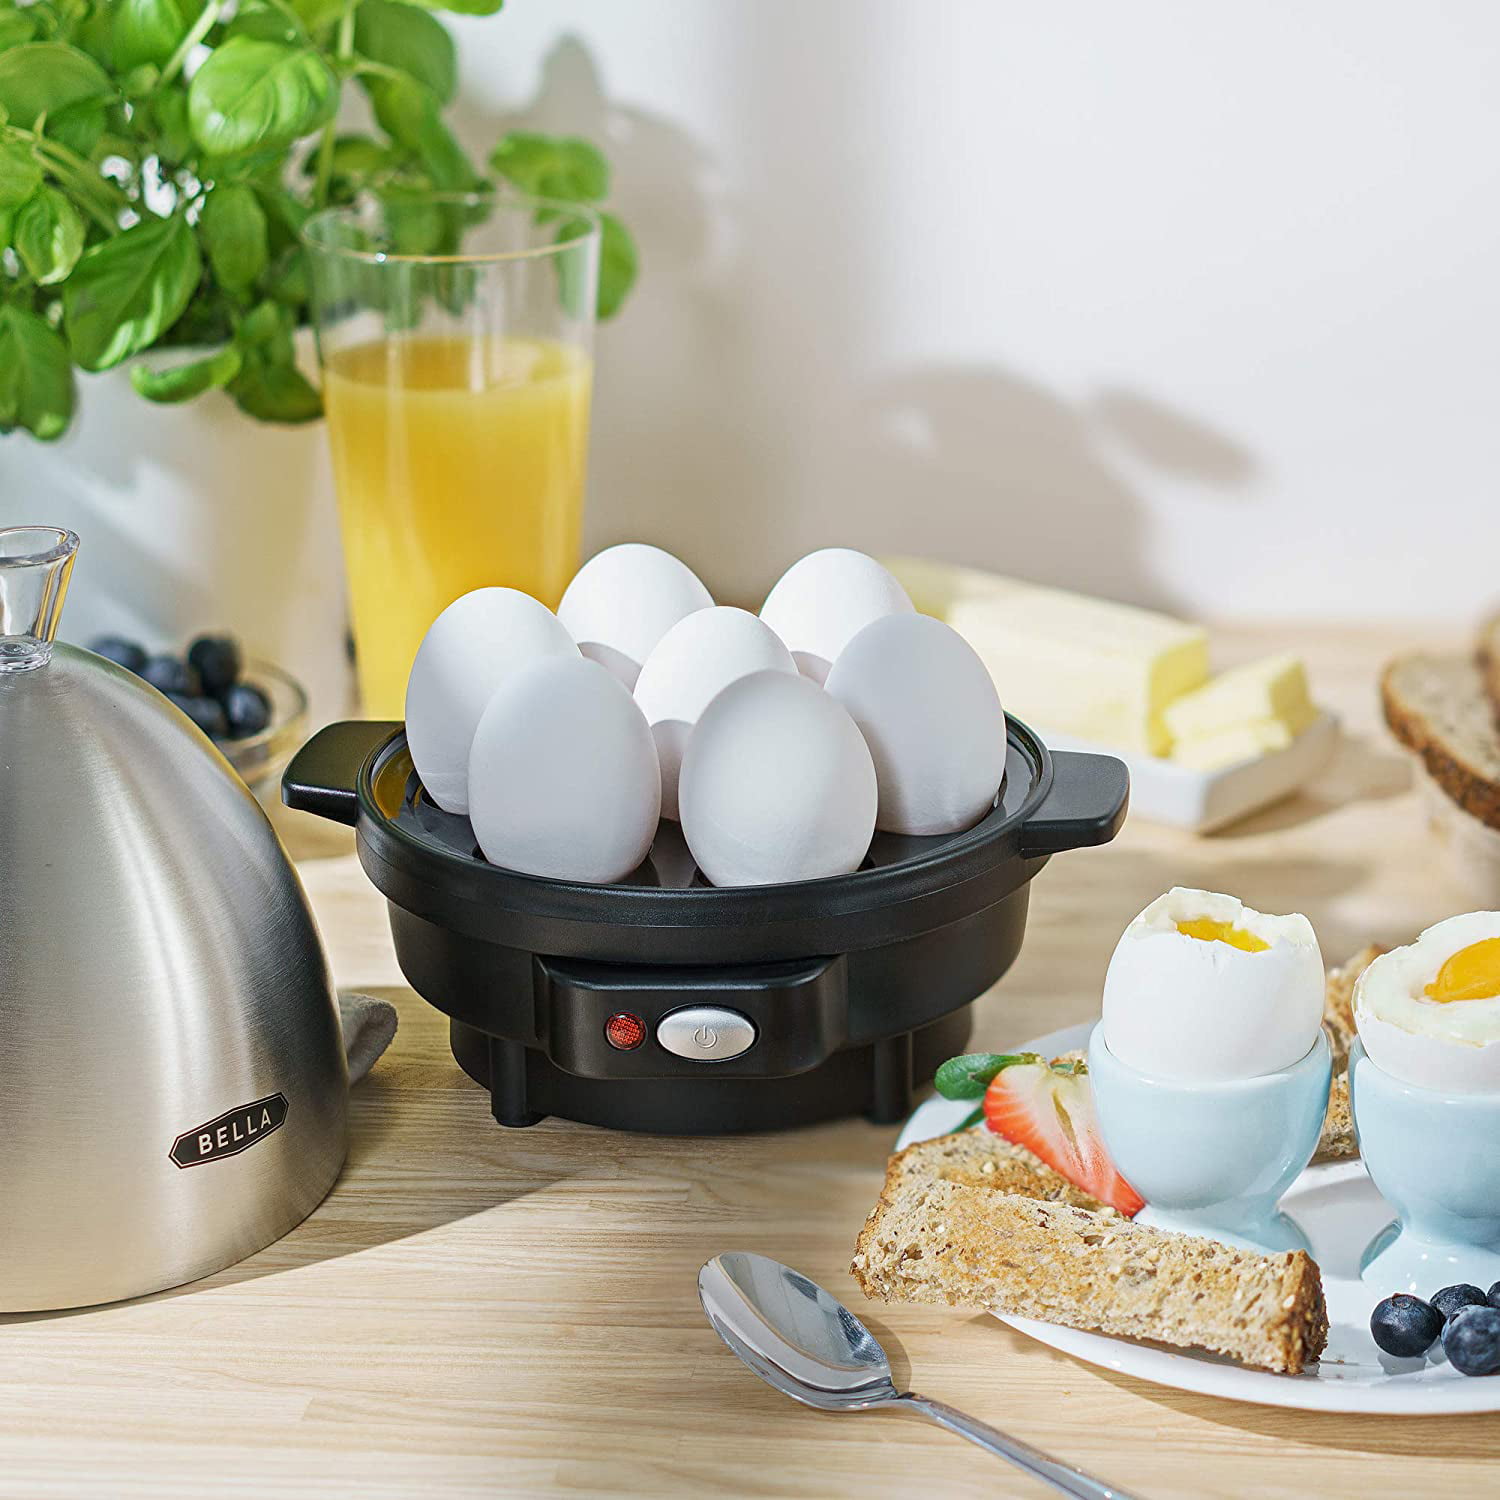  BELLA Rapid Electric Egg Cooker and Poacher with Auto Shut Off  for Omelet, Soft, Medium and Hard Boiled Eggs - 7 Egg Capacity Tray, Single  Stack, White: Home & Kitchen